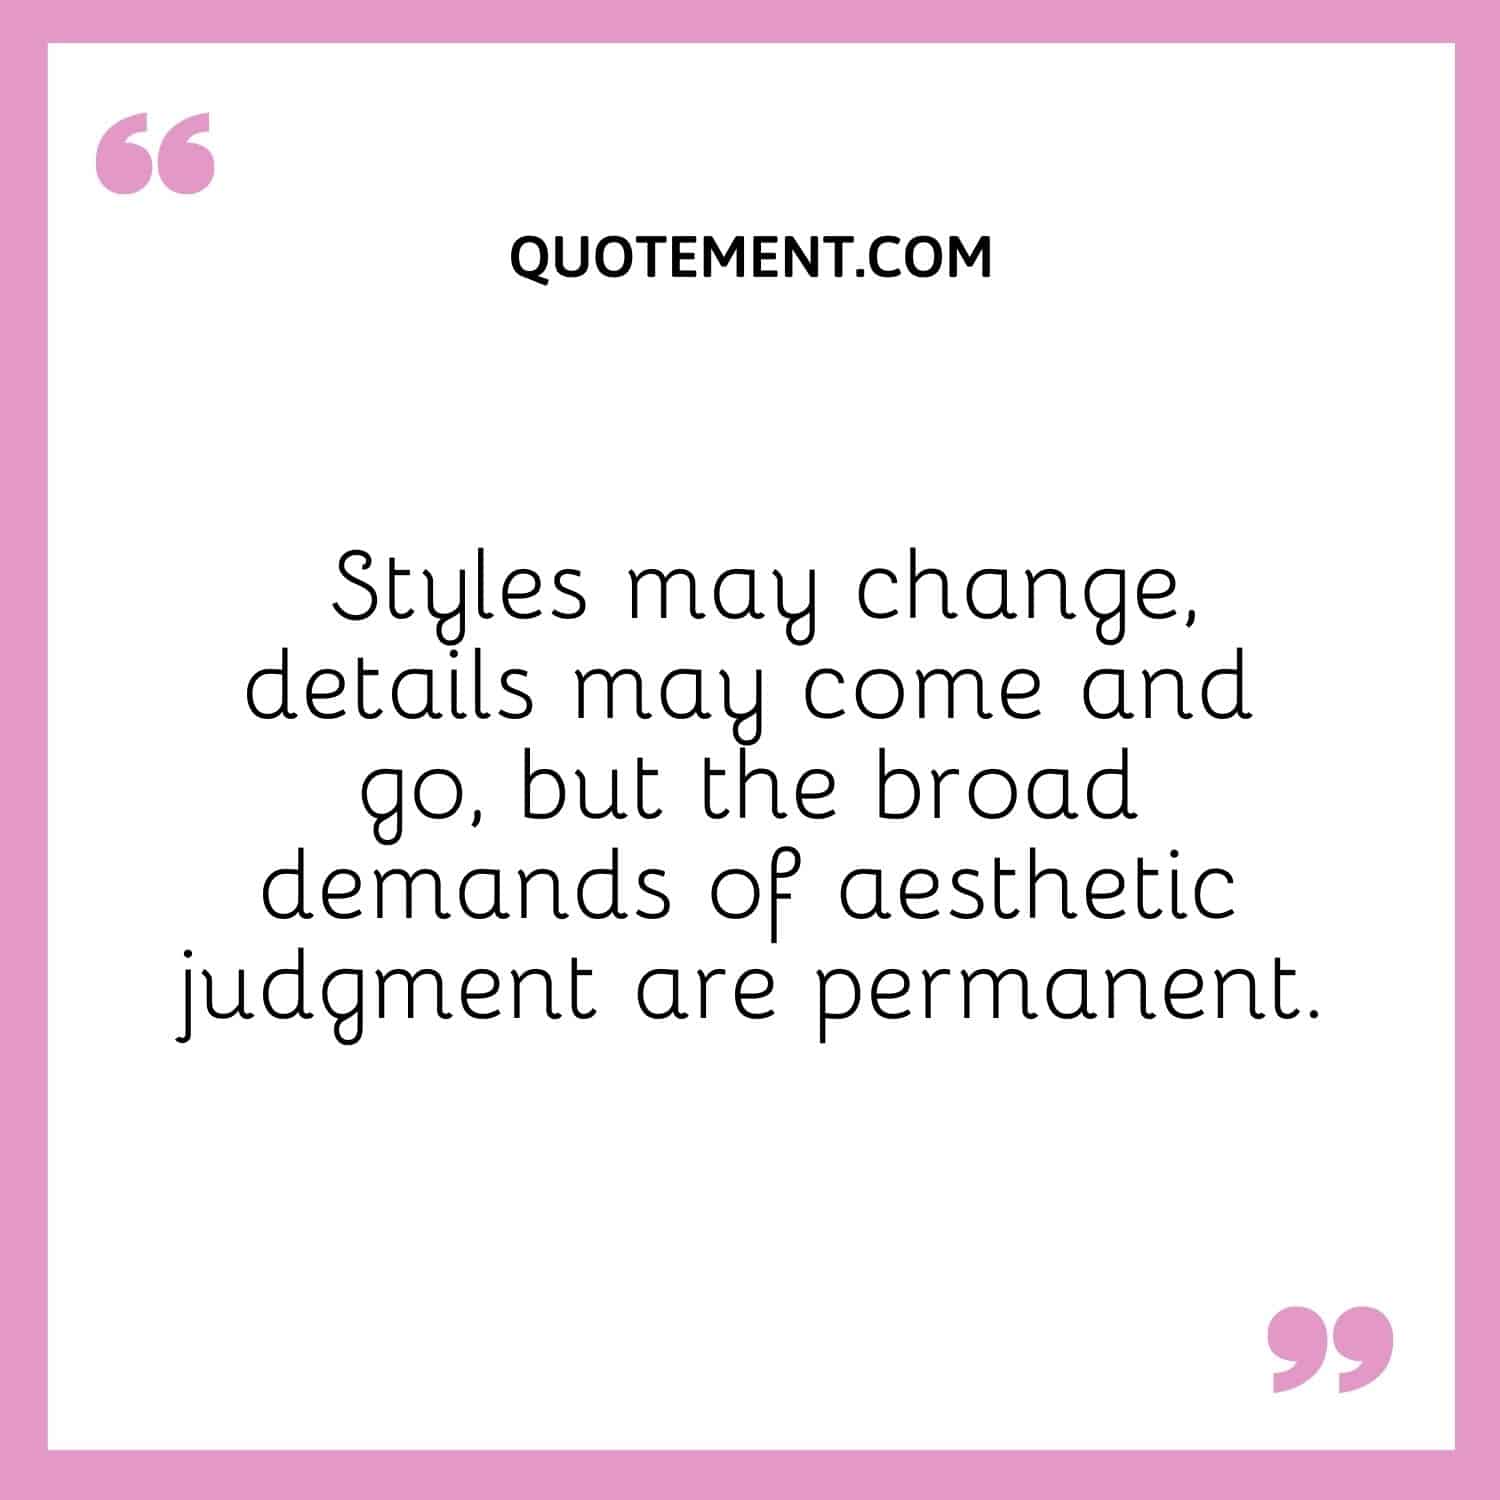 Styles may change, details may come and go, but the broad demands of aesthetic judgment are permanent.